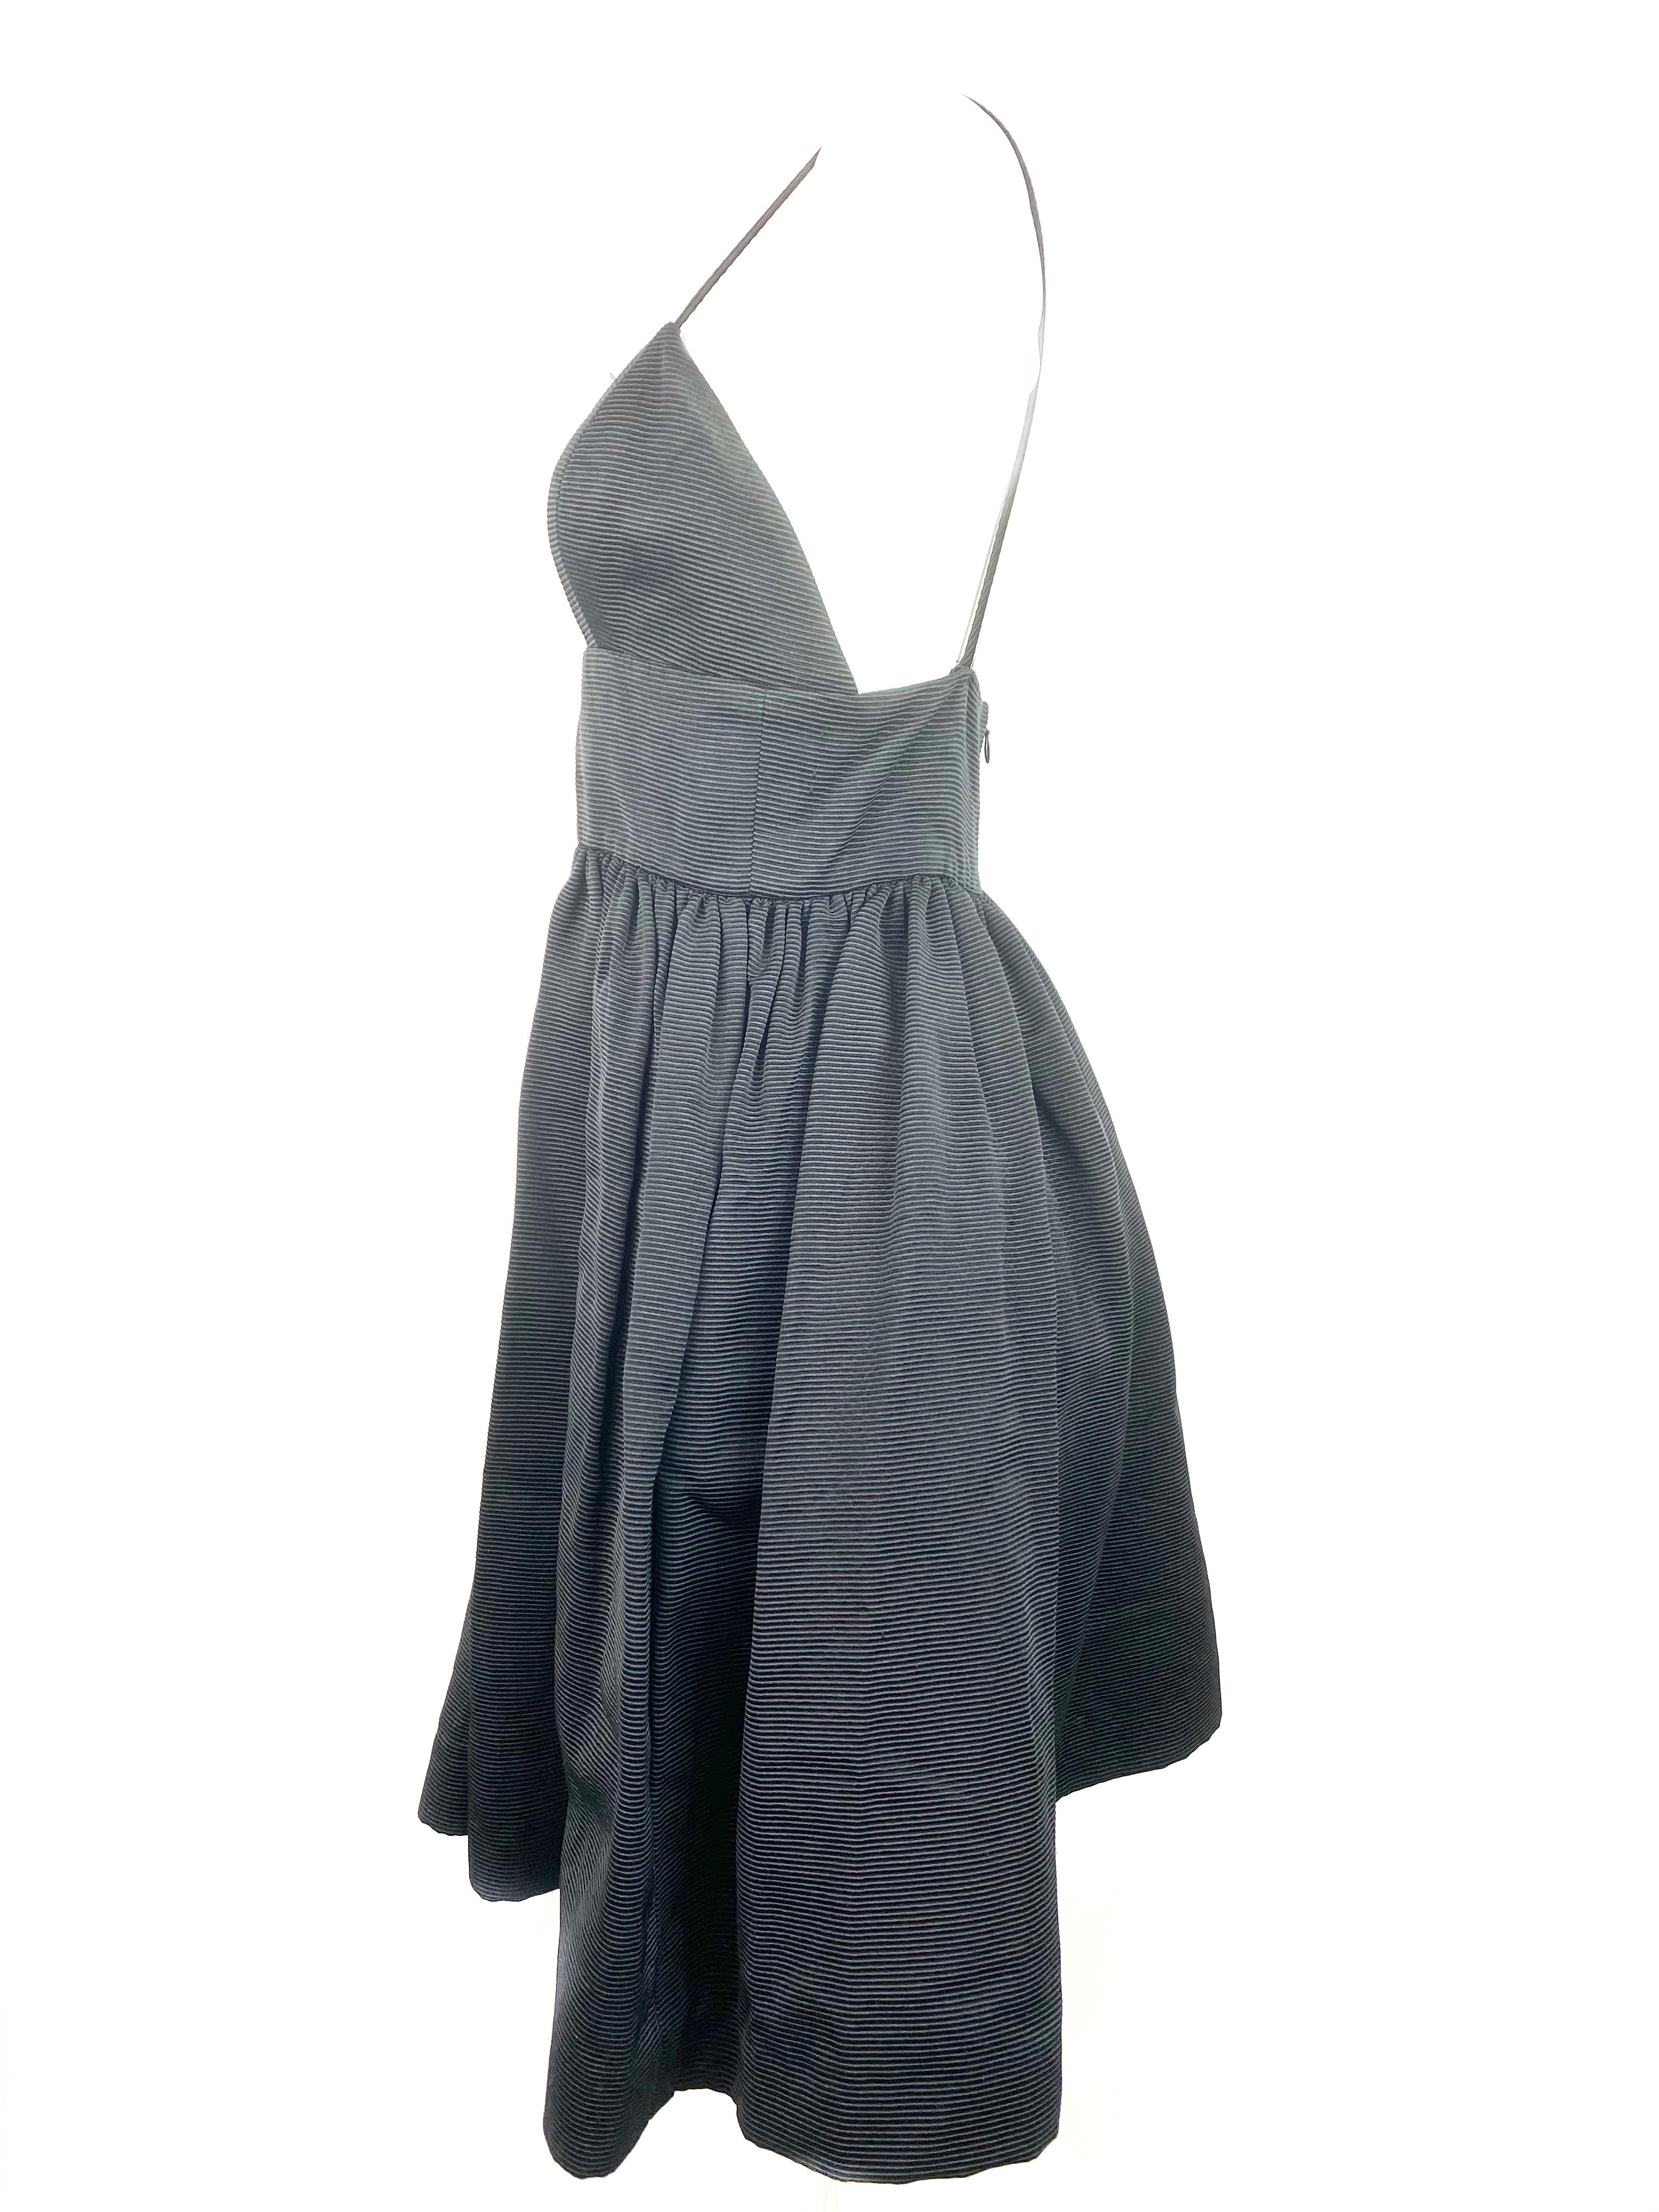 Bill Blass Black Babydoll Dress Size 8 In Excellent Condition For Sale In Beverly Hills, CA